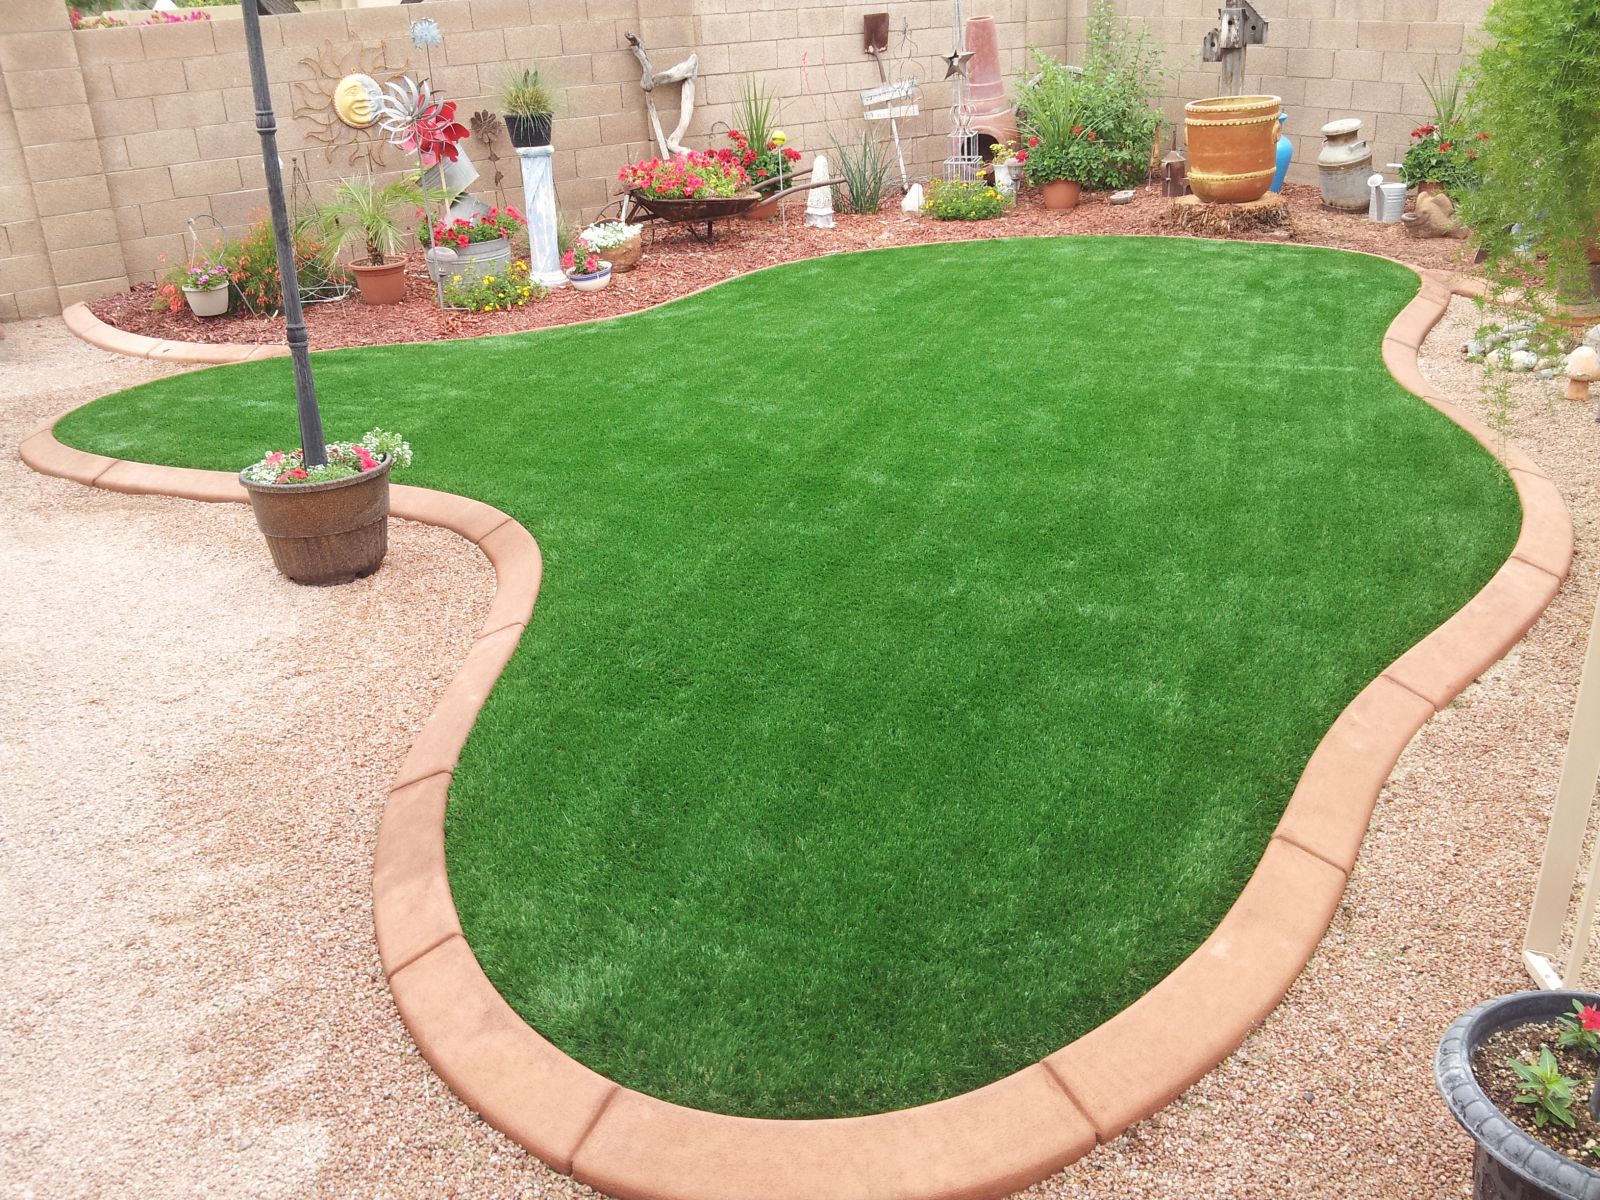 Find a Reliable Artificial Grass Installer in Queen Creek Today